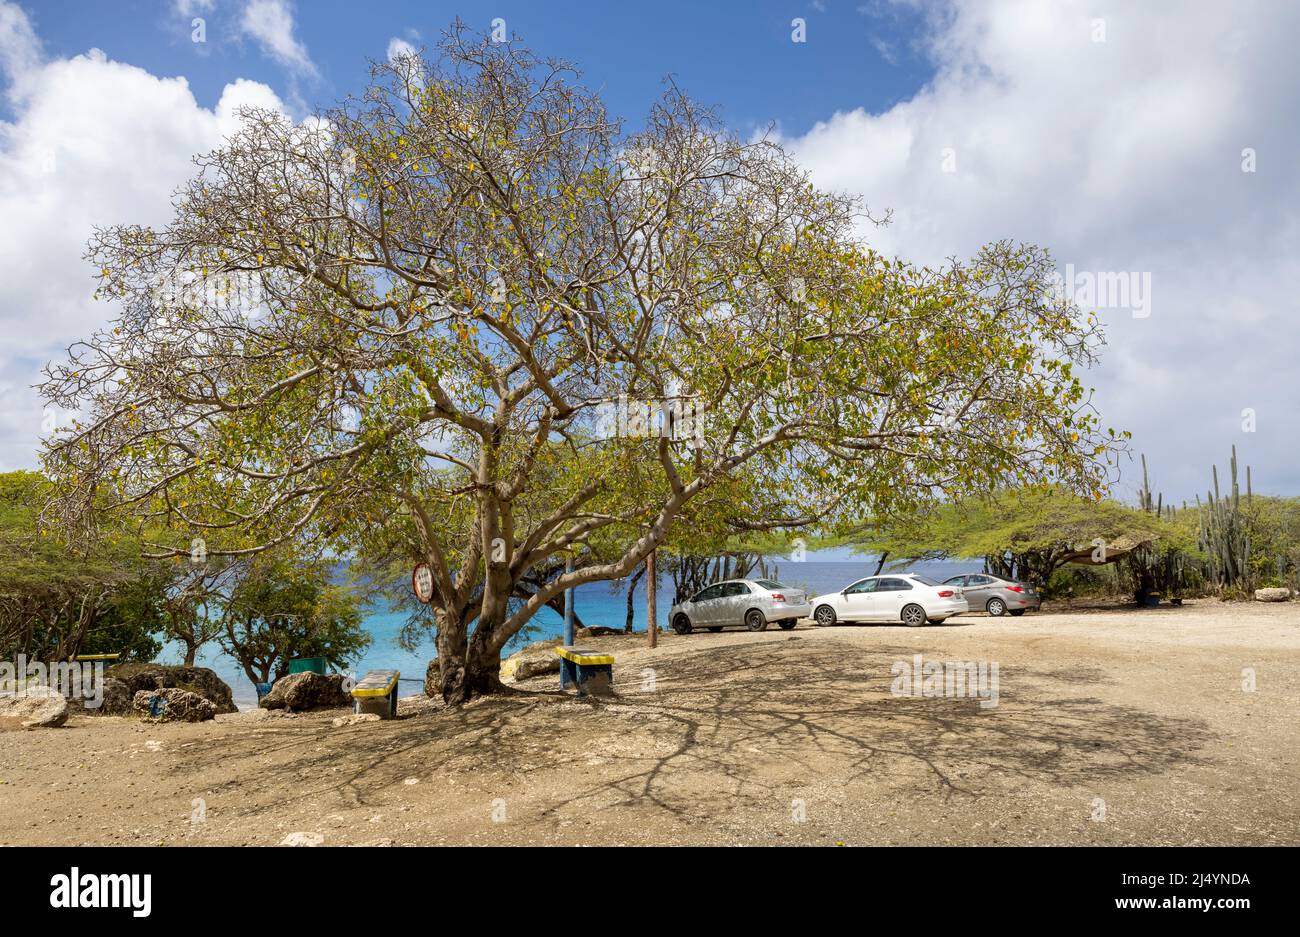 Poisonous manchineel tree at the parking lot of Playa Jeremi on the Caribbean island Curacao Stock Photo